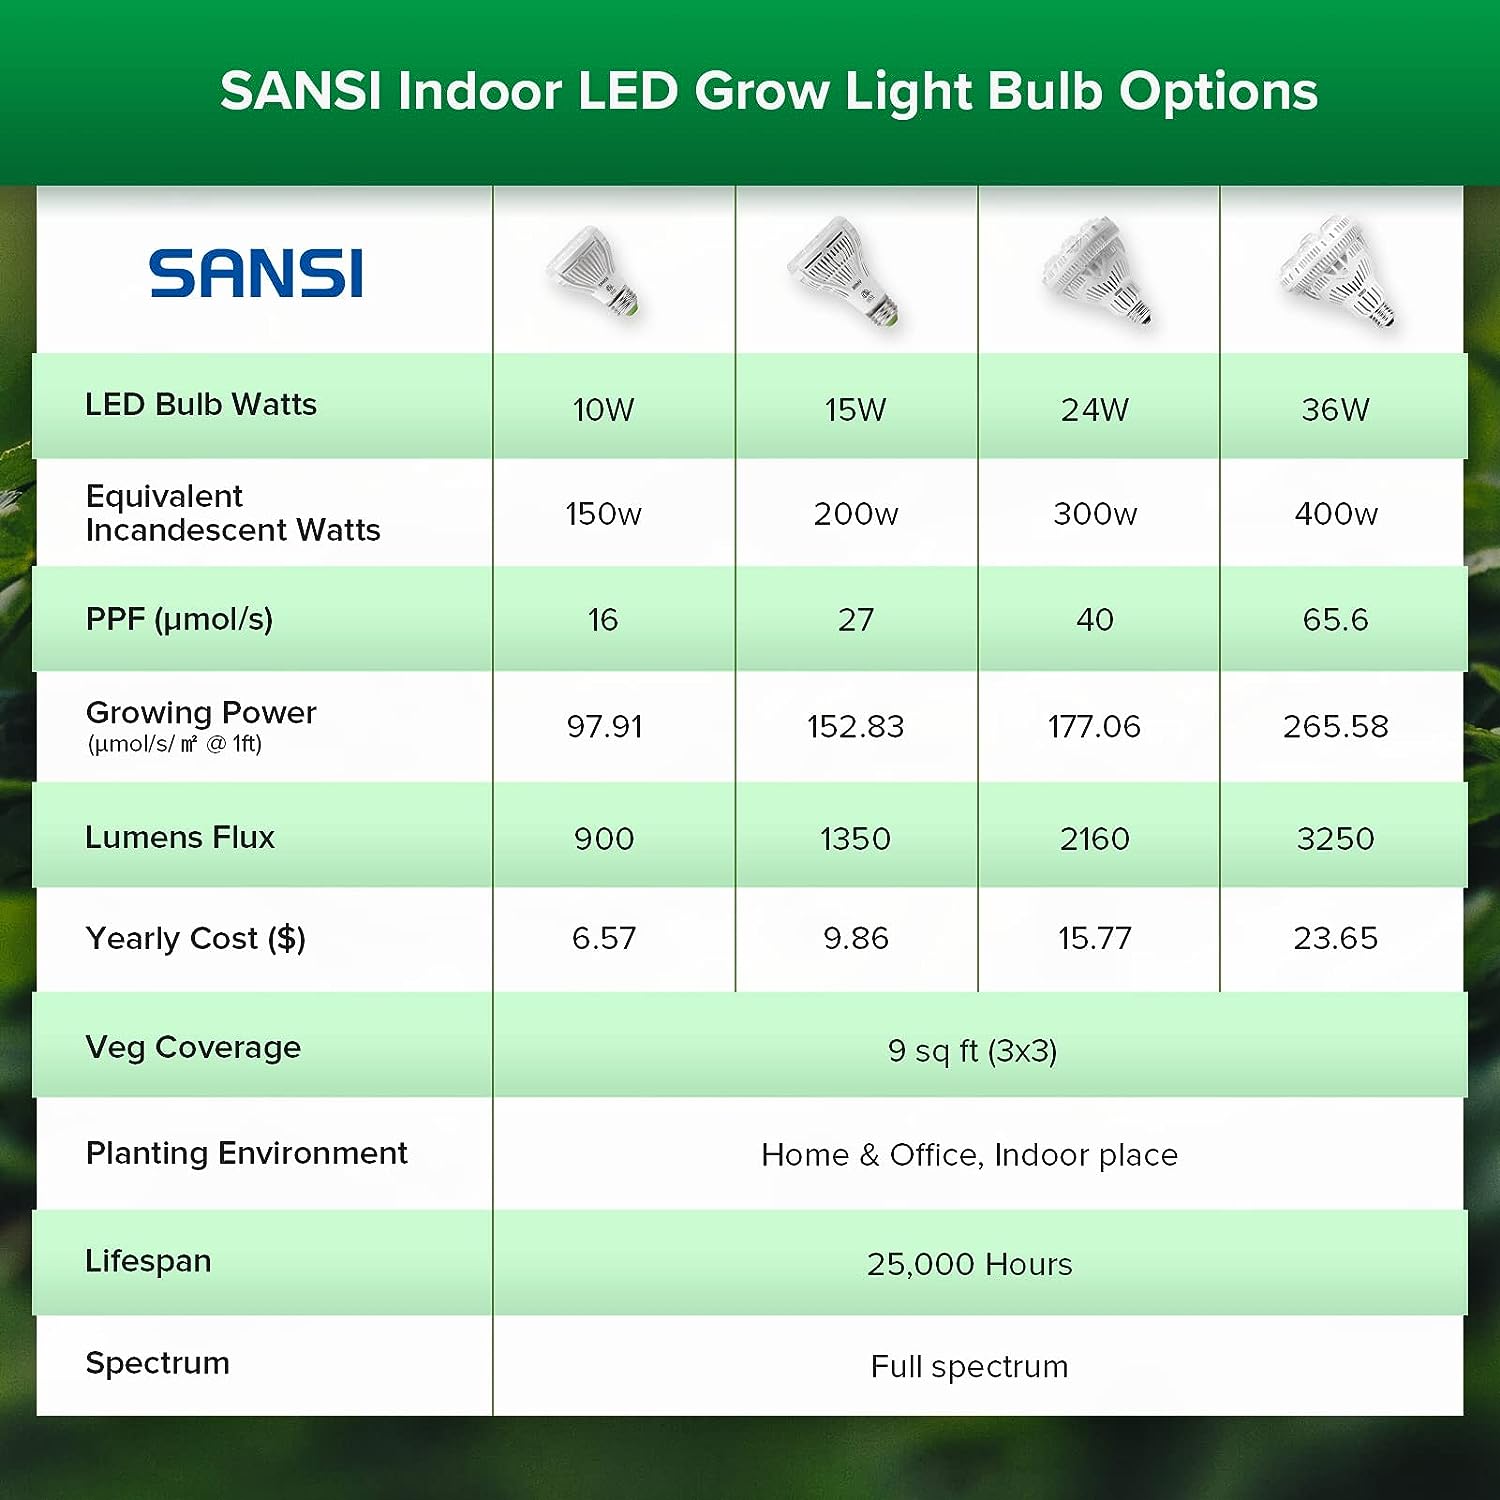 SANSI Grow Light Bulb with COC Technology, PPF 65.6 umol/s LED Full Spectrum, 36W Grow Lamp (400 Watt Equivalent) with Optical Lens for High PPFD, Energy Saving Plant Lights for Seeding and Growing